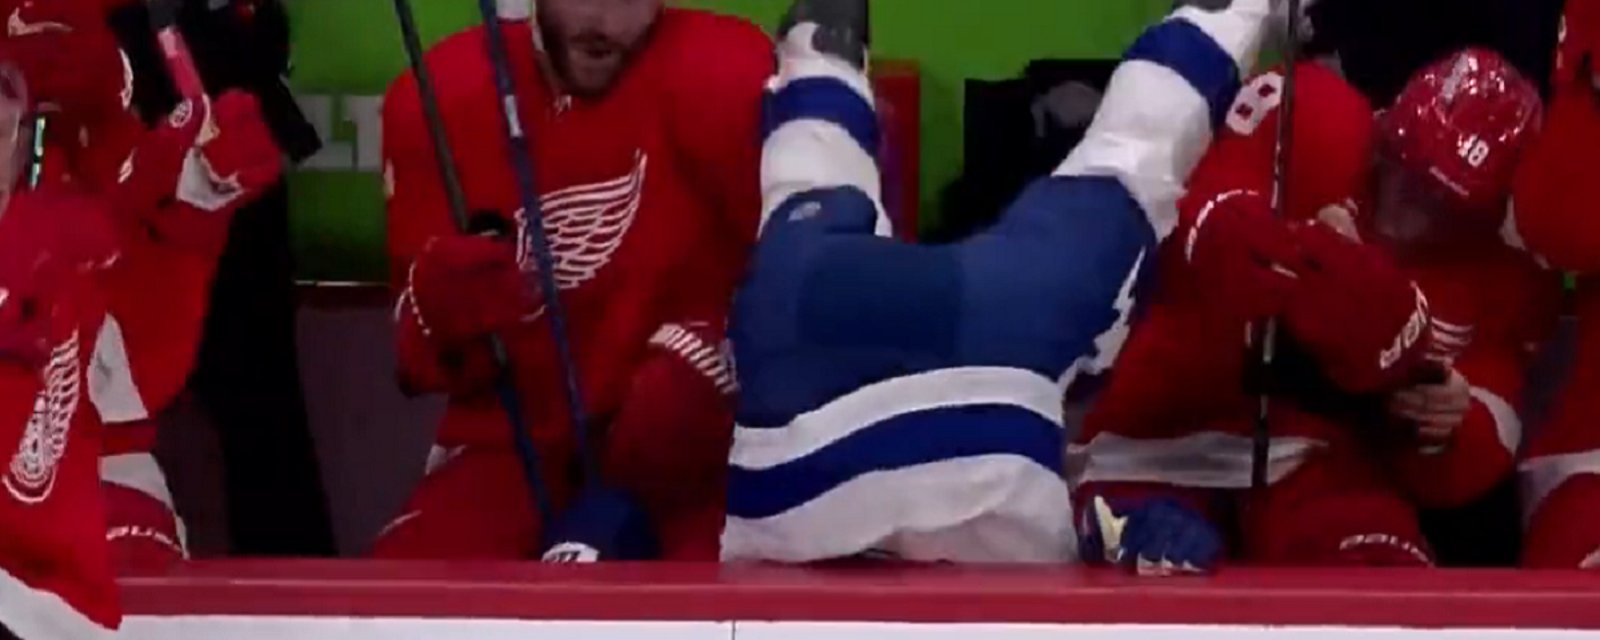 Mikey Eyssimont gets dumped head first into the bench.